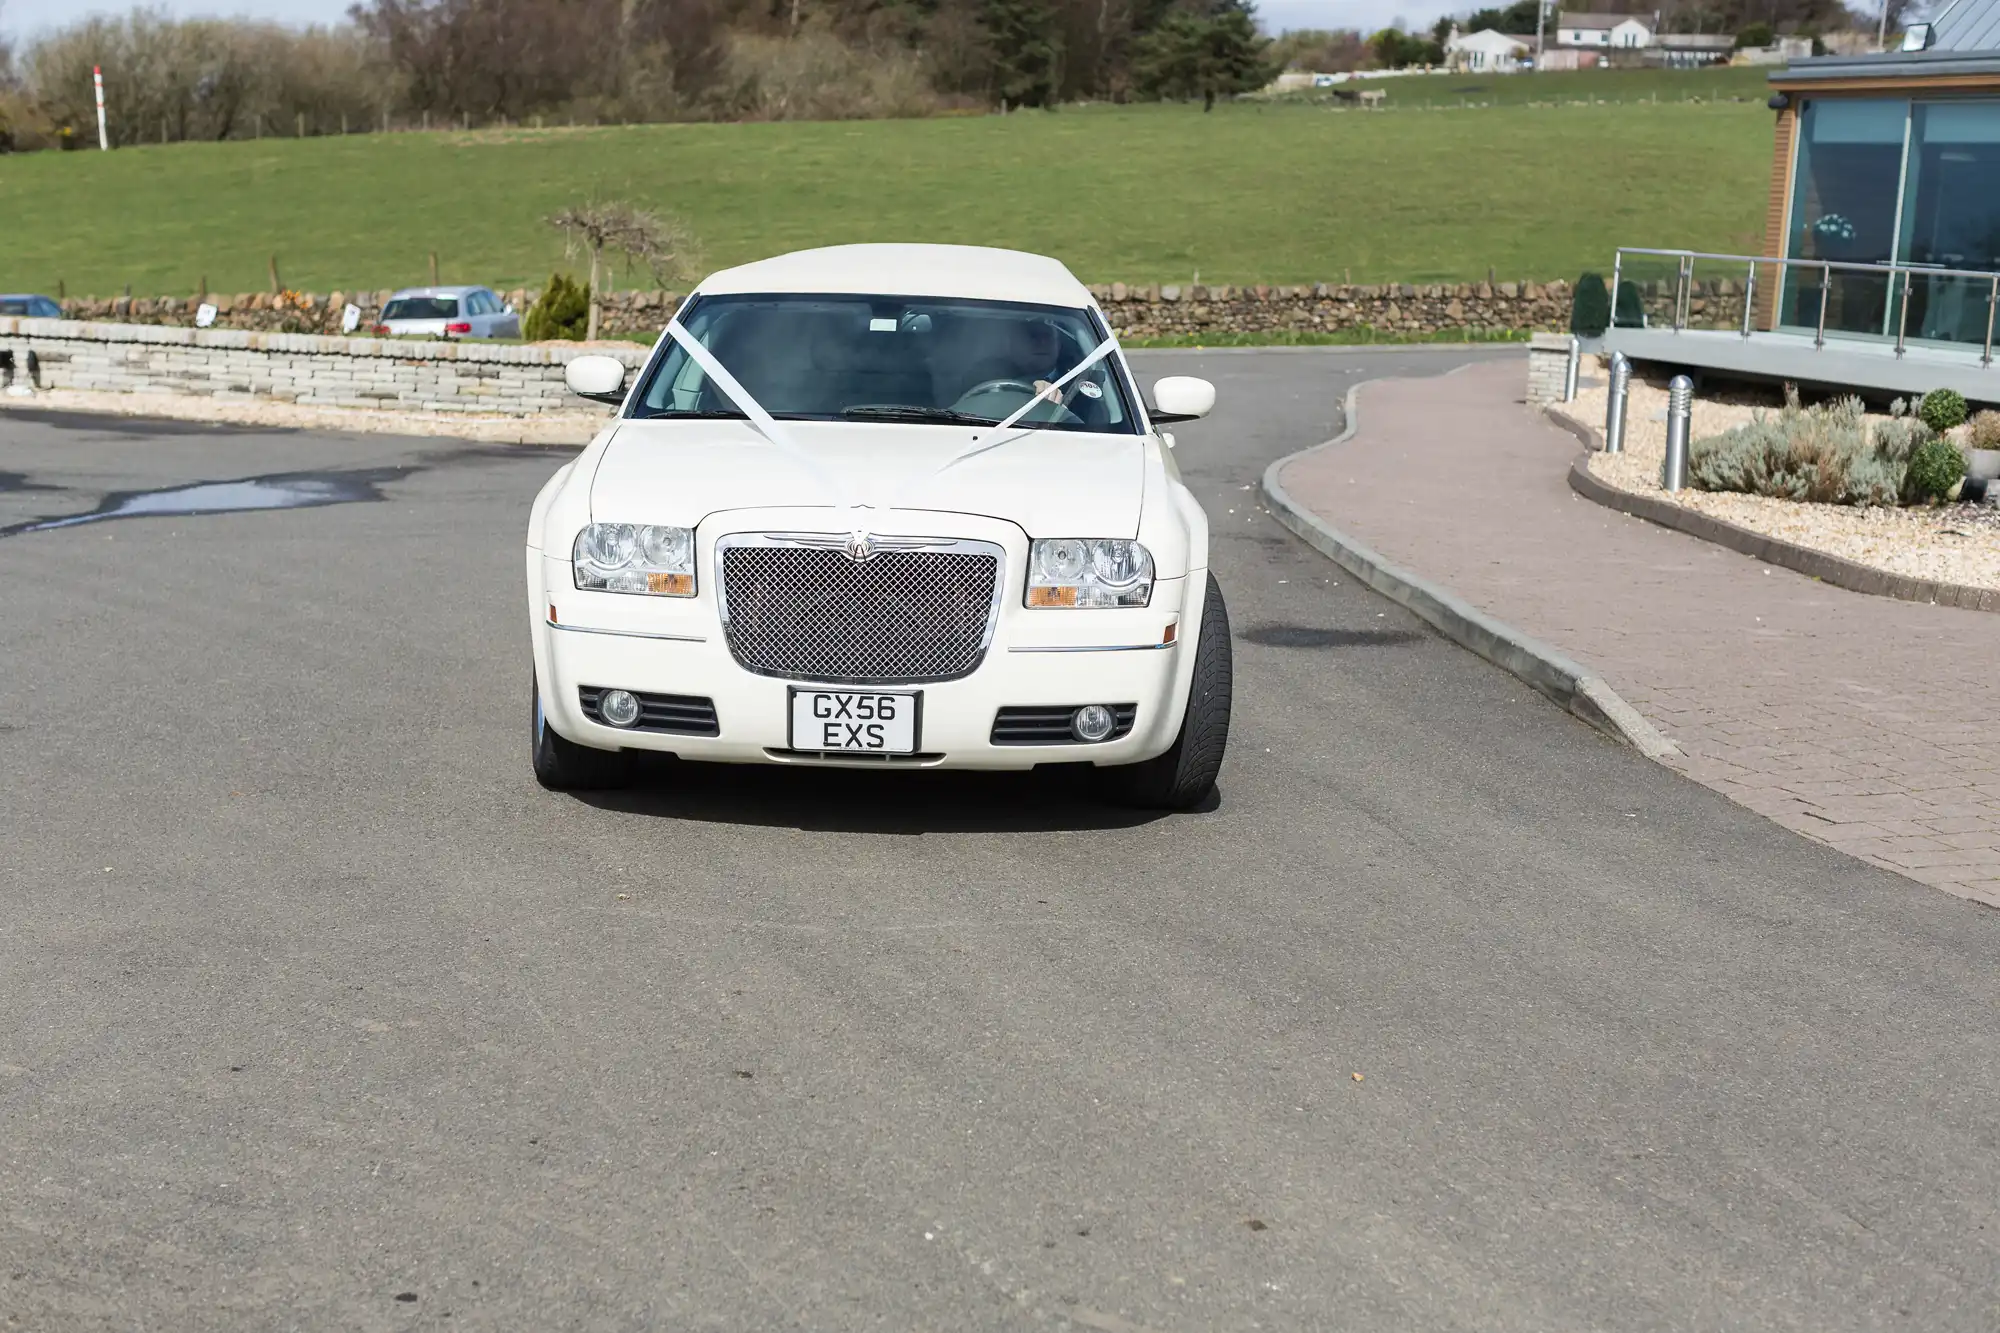 A white chrysler 300 parked on a tarmac driveway, with green hills and a building in the background.